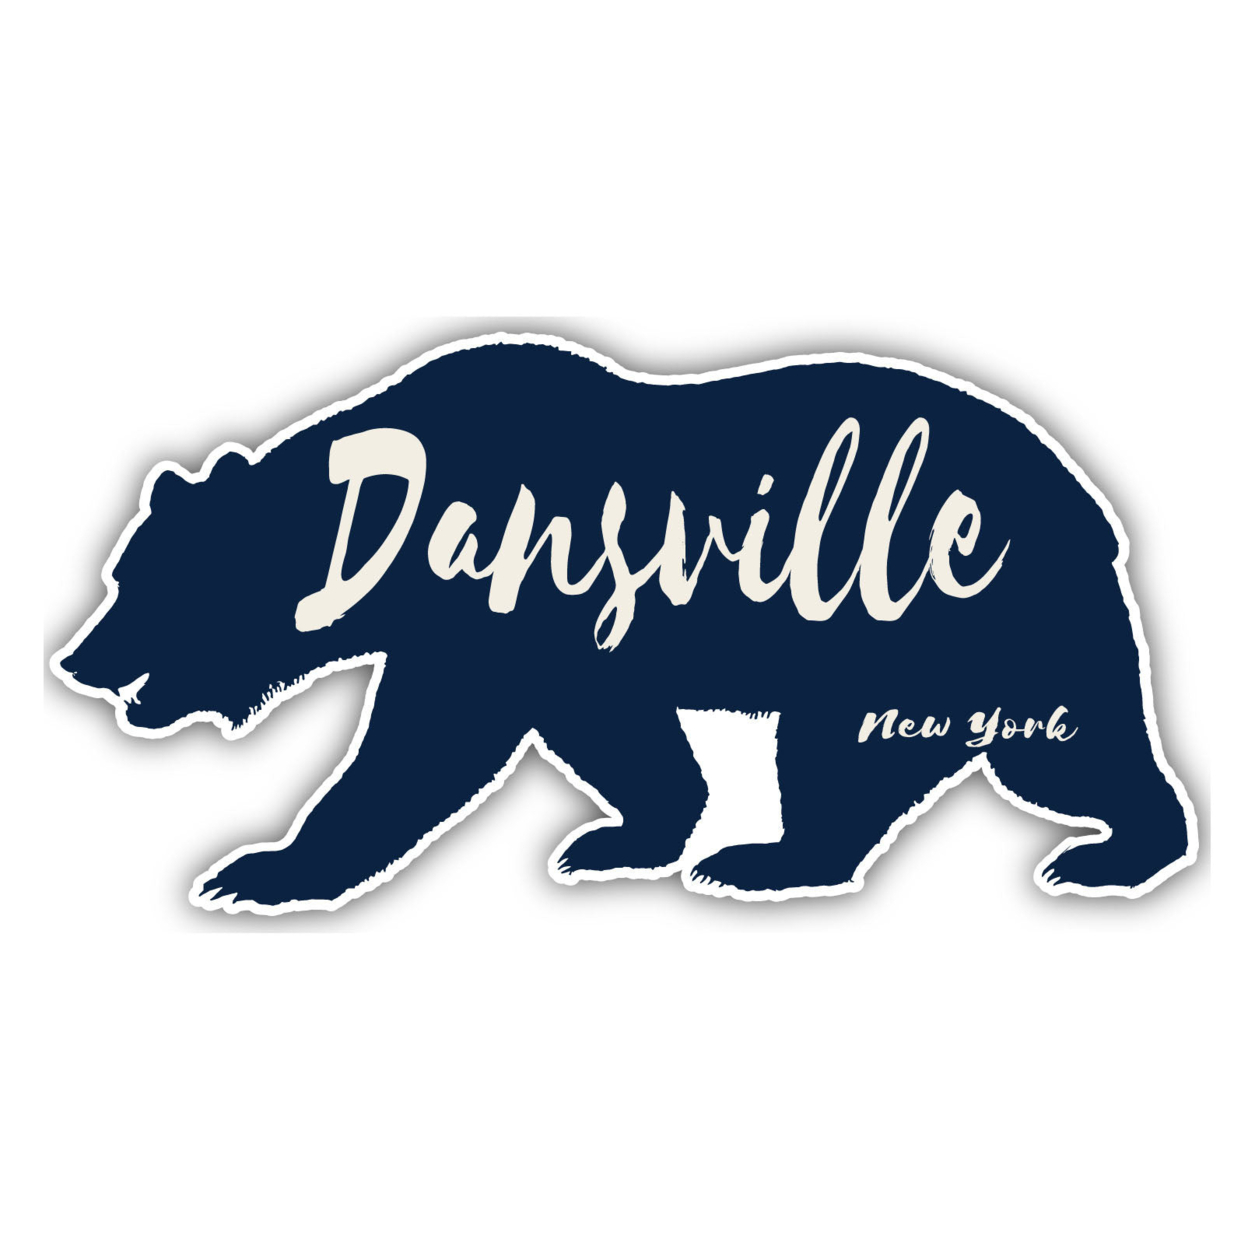 Dansville New York Souvenir Decorative Stickers (Choose Theme And Size) - 4-Pack, 12-Inch, Bear